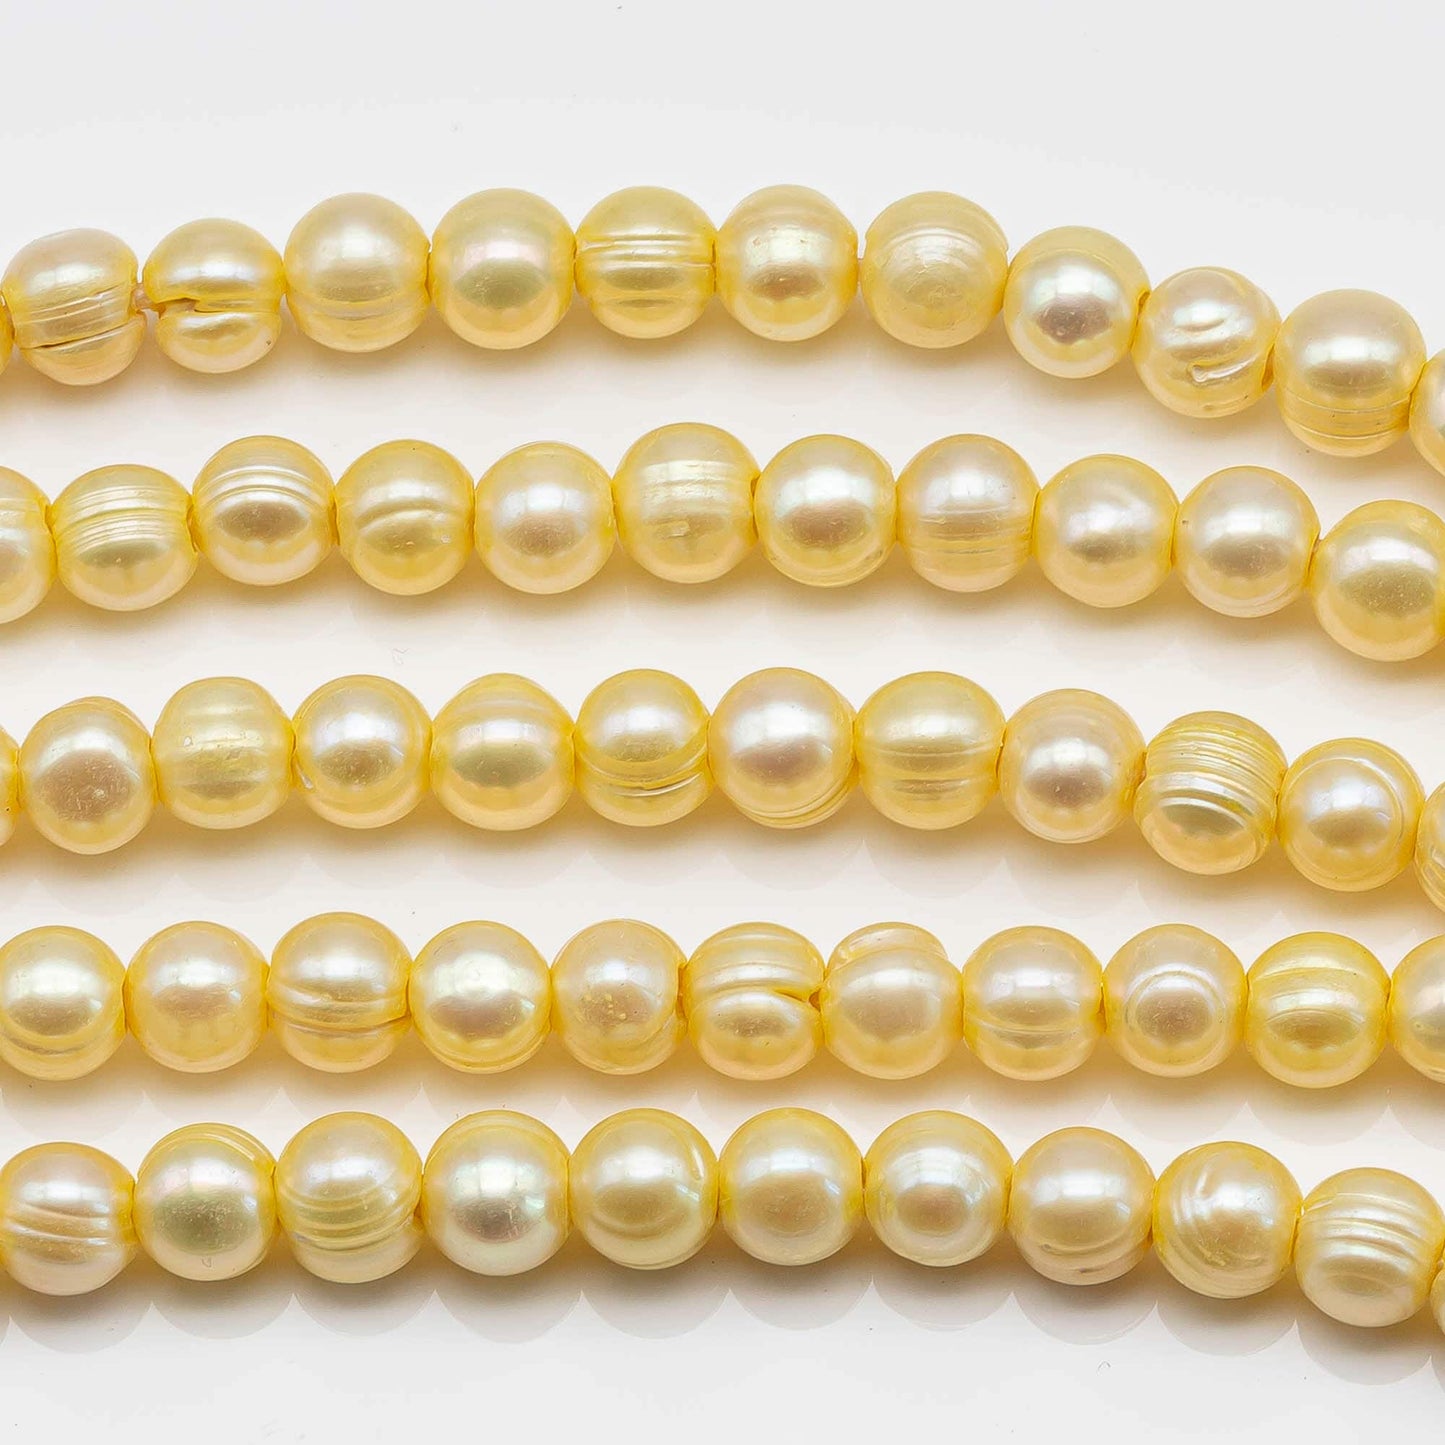 8-9mm Large Hole Freshwater Pearl Bead in Yellow Color in 8 Inch Strand for Jewelry Making, SKU # 1628FW